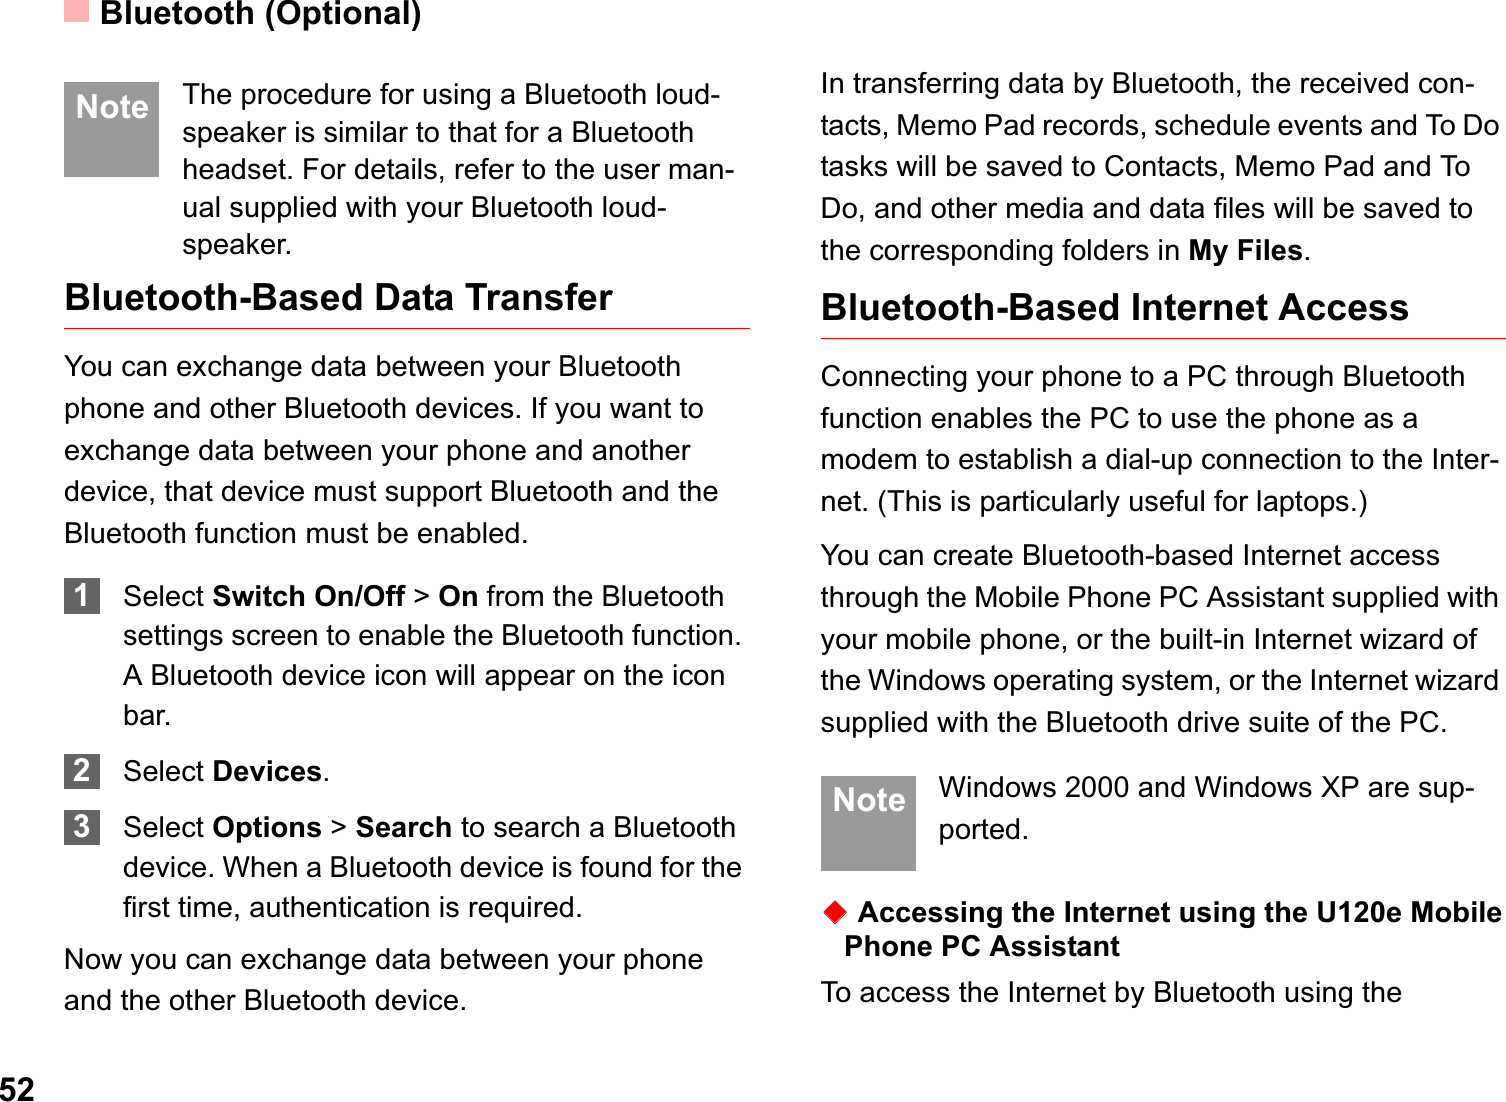 Bluetooth (Optional)52 Note The procedure for using a Bluetooth loud-speaker is similar to that for a Bluetooth headset. For details, refer to the user man-ual supplied with your Bluetooth loud-speaker.Bluetooth-Based Data TransferYou can exchange data between your Bluetooth phone and other Bluetooth devices. If you want to exchange data between your phone and another device, that device must support Bluetooth and the Bluetooth function must be enabled.1Select Switch On/Off &gt; On from the Bluetooth settings screen to enable the Bluetooth function. A Bluetooth device icon will appear on the icon bar.2Select Devices.3Select Options &gt; Search to search a Bluetooth device. When a Bluetooth device is found for the first time, authentication is required.Now you can exchange data between your phone and the other Bluetooth device. In transferring data by Bluetooth, the received con-tacts, Memo Pad records, schedule events and To Do tasks will be saved to Contacts, Memo Pad and To Do, and other media and data files will be saved to the corresponding folders in My Files.Bluetooth-Based Internet AccessConnecting your phone to a PC through Bluetooth function enables the PC to use the phone as a modem to establish a dial-up connection to the Inter-net. (This is particularly useful for laptops.)You can create Bluetooth-based Internet access through the Mobile Phone PC Assistant supplied with your mobile phone, or the built-in Internet wizard of the Windows operating system, or the Internet wizard supplied with the Bluetooth drive suite of the PC. Note Windows 2000 and Windows XP are sup-ported.ƹAccessing the Internet using the U120e Mobile Phone PC AssistantTo access the Internet by Bluetooth using the 